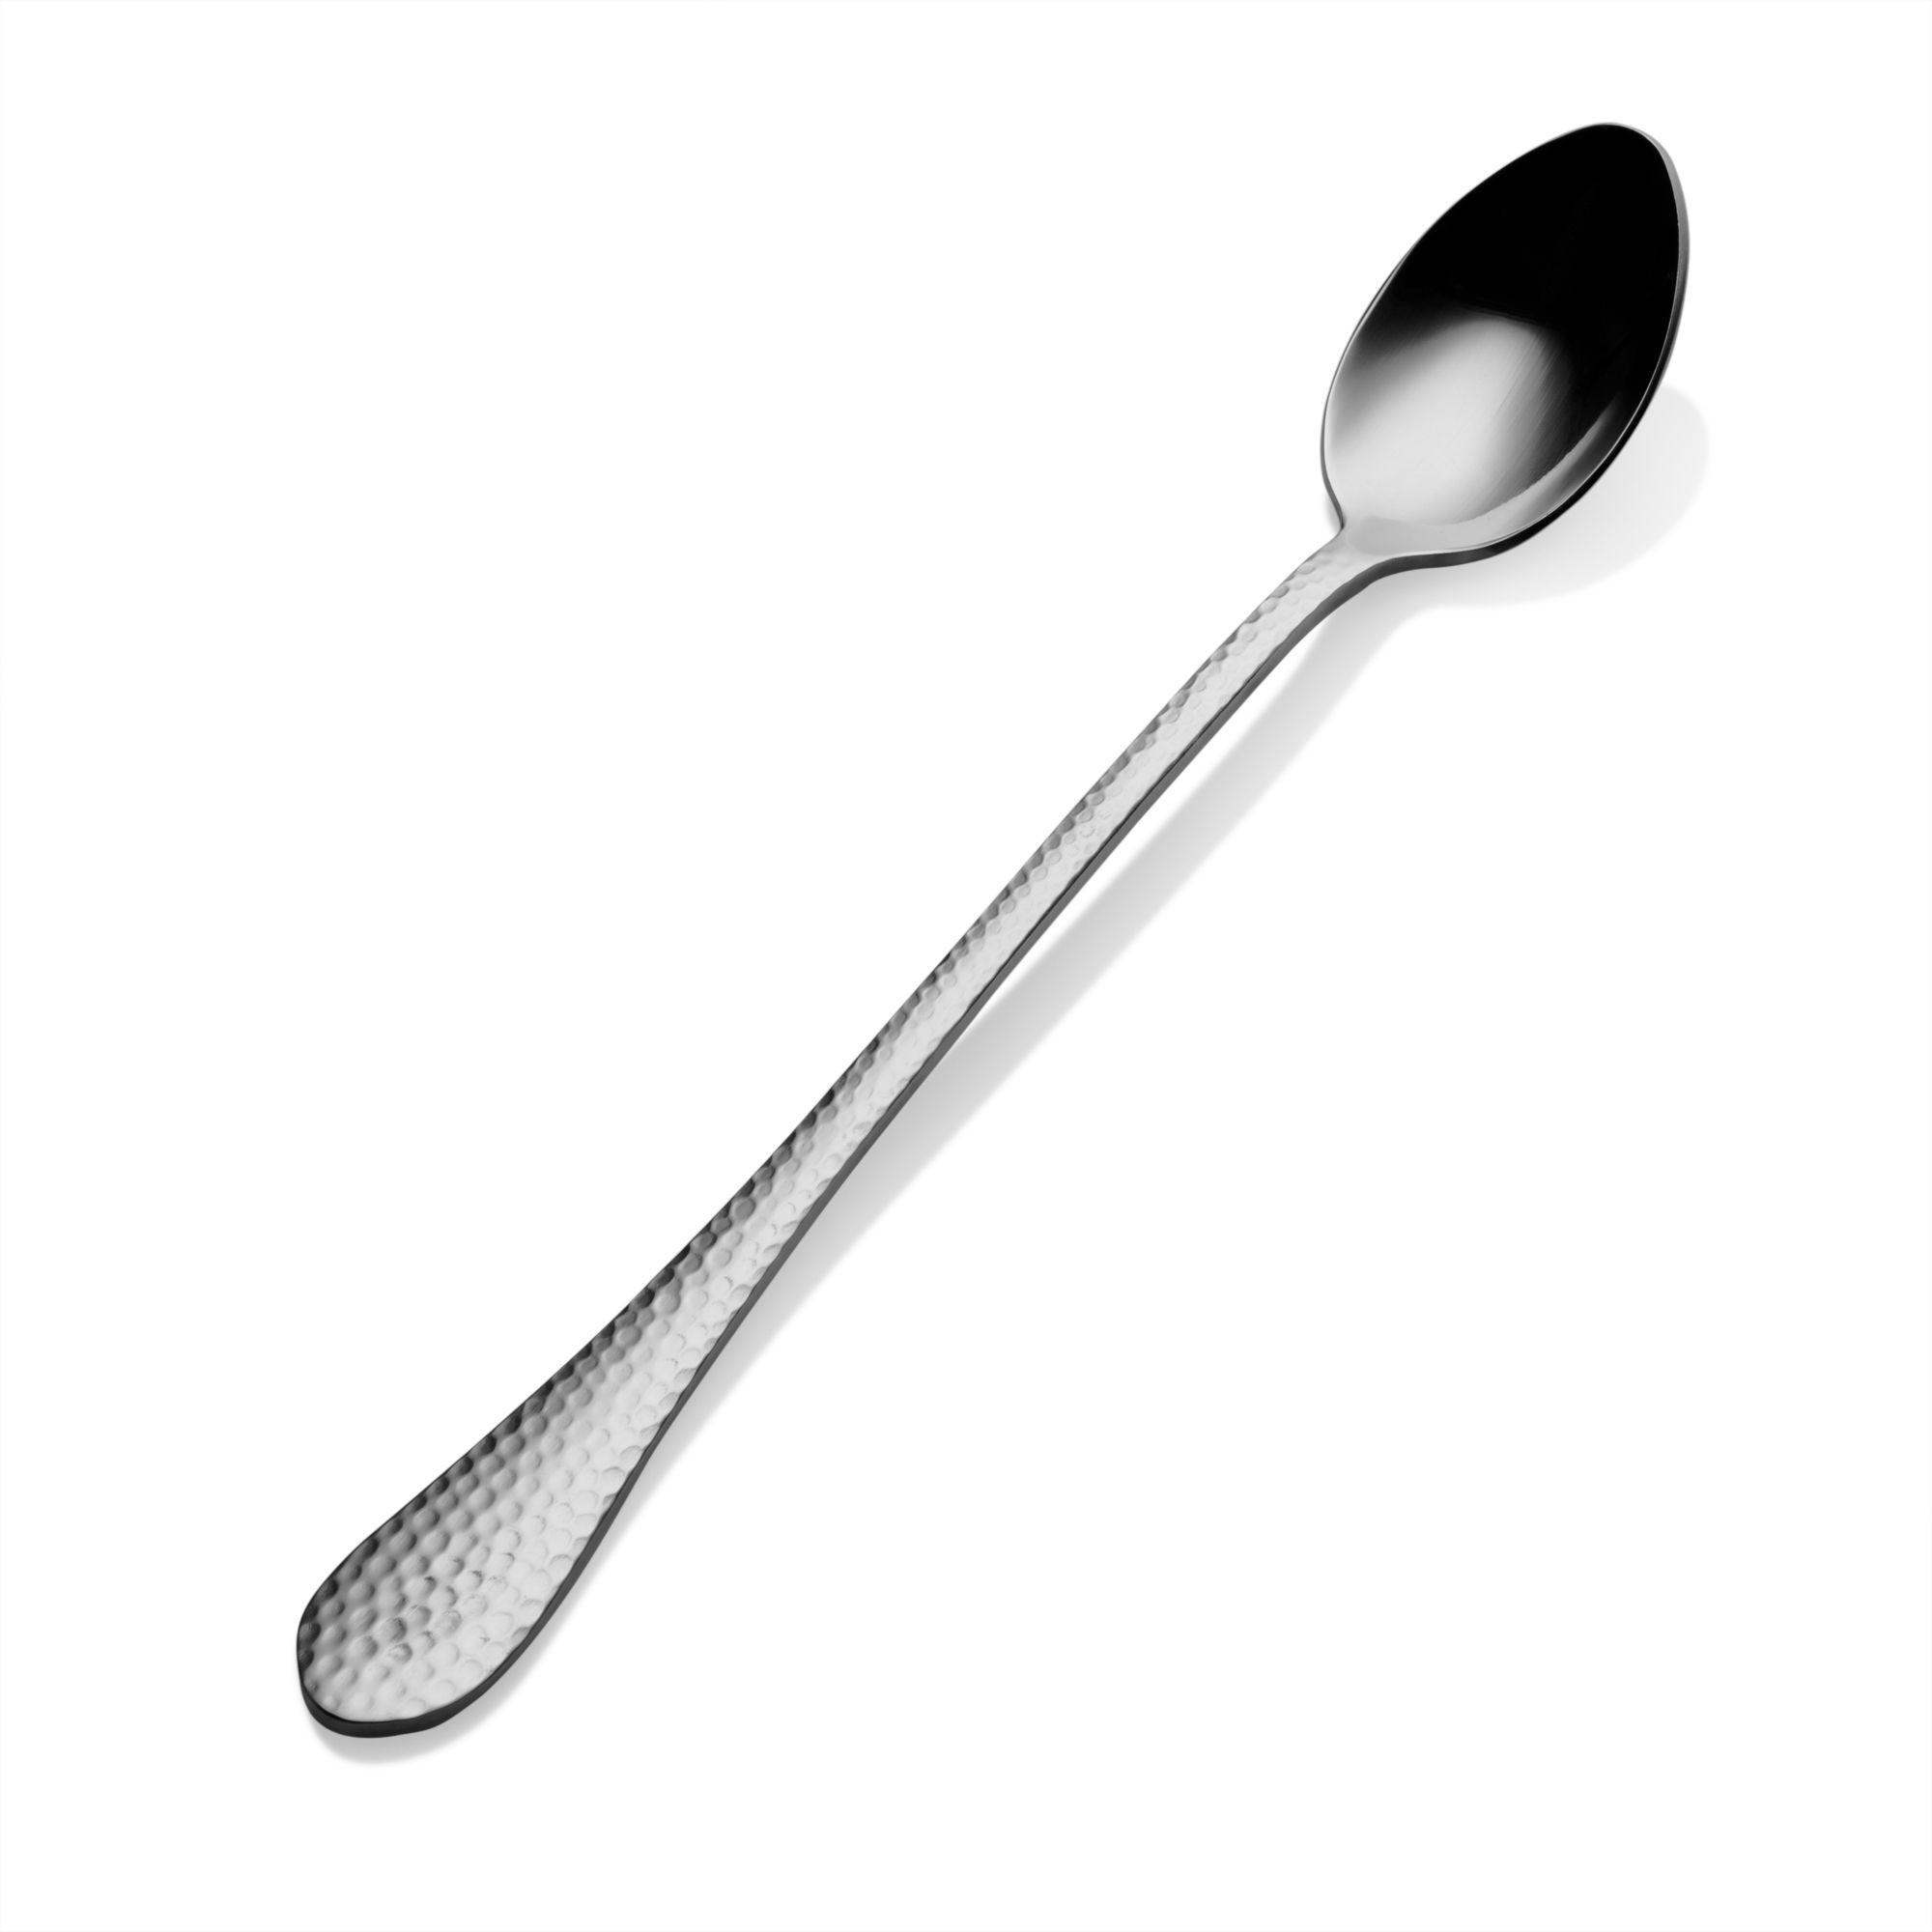 Bon Chef S1202S Reflections 18/8 Stainless Steel Silverplated Iced Tea Spoon